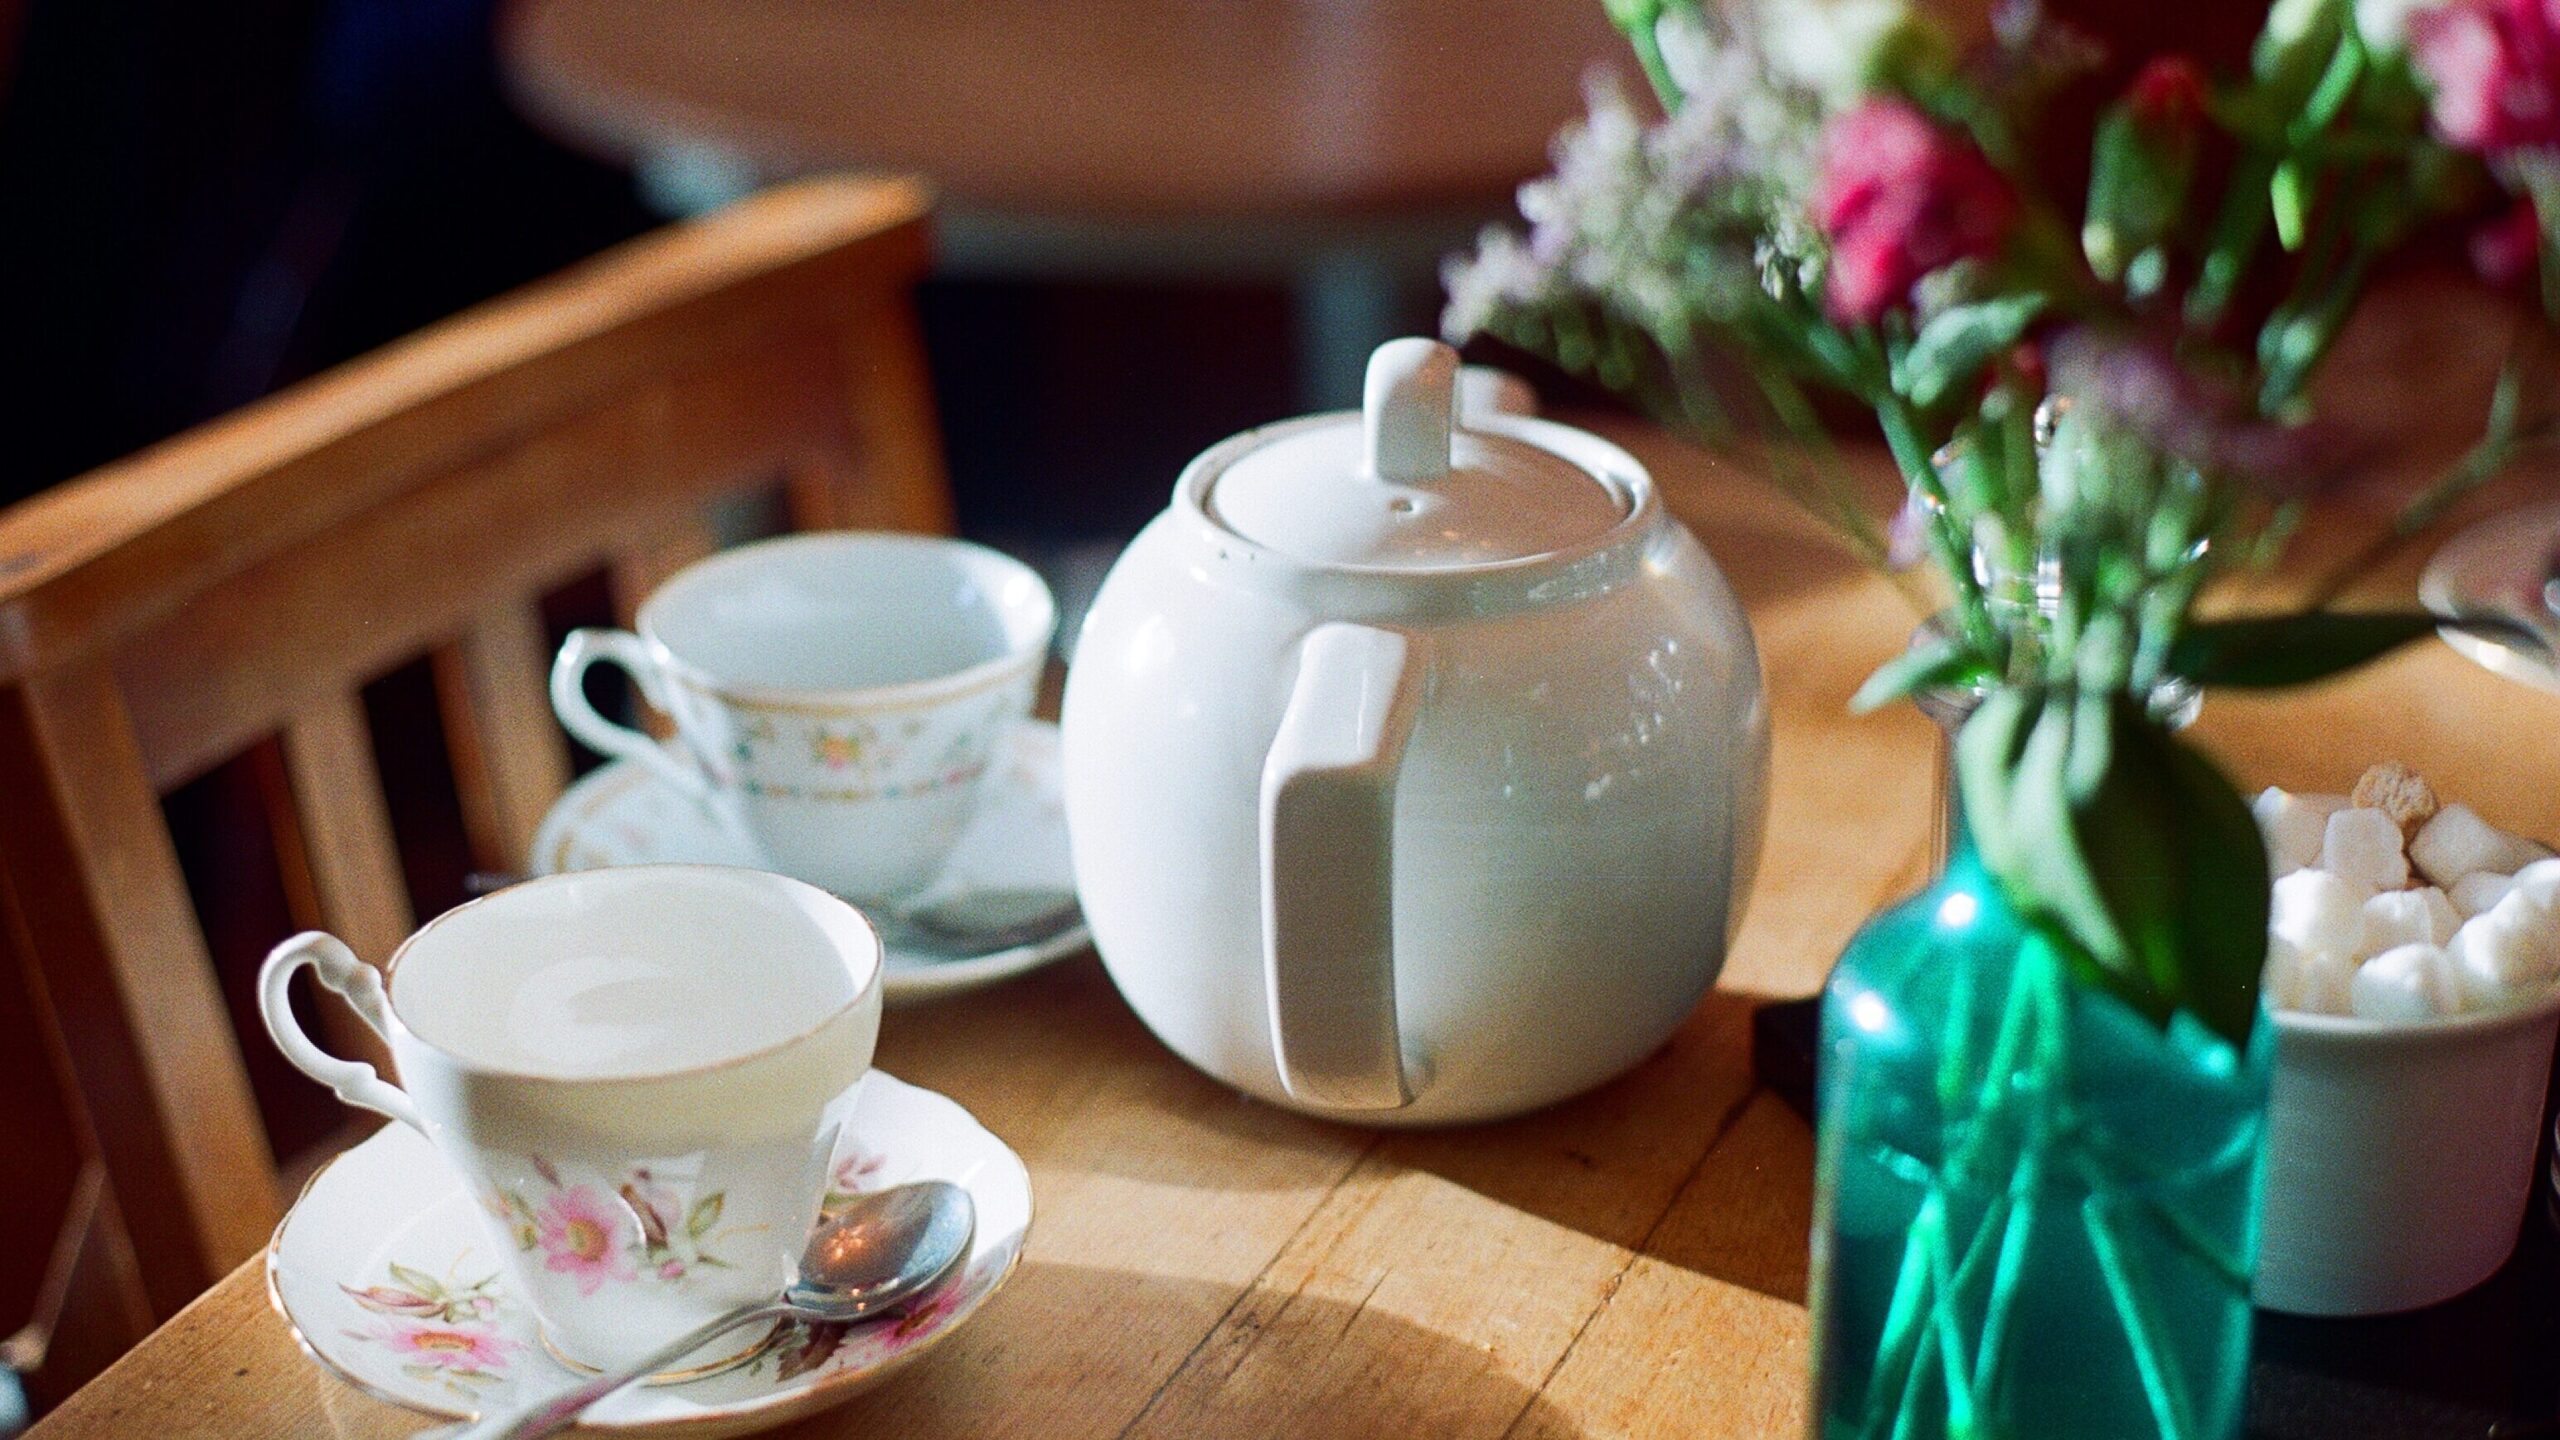 Teapot beside two teacups and a vase of flowers